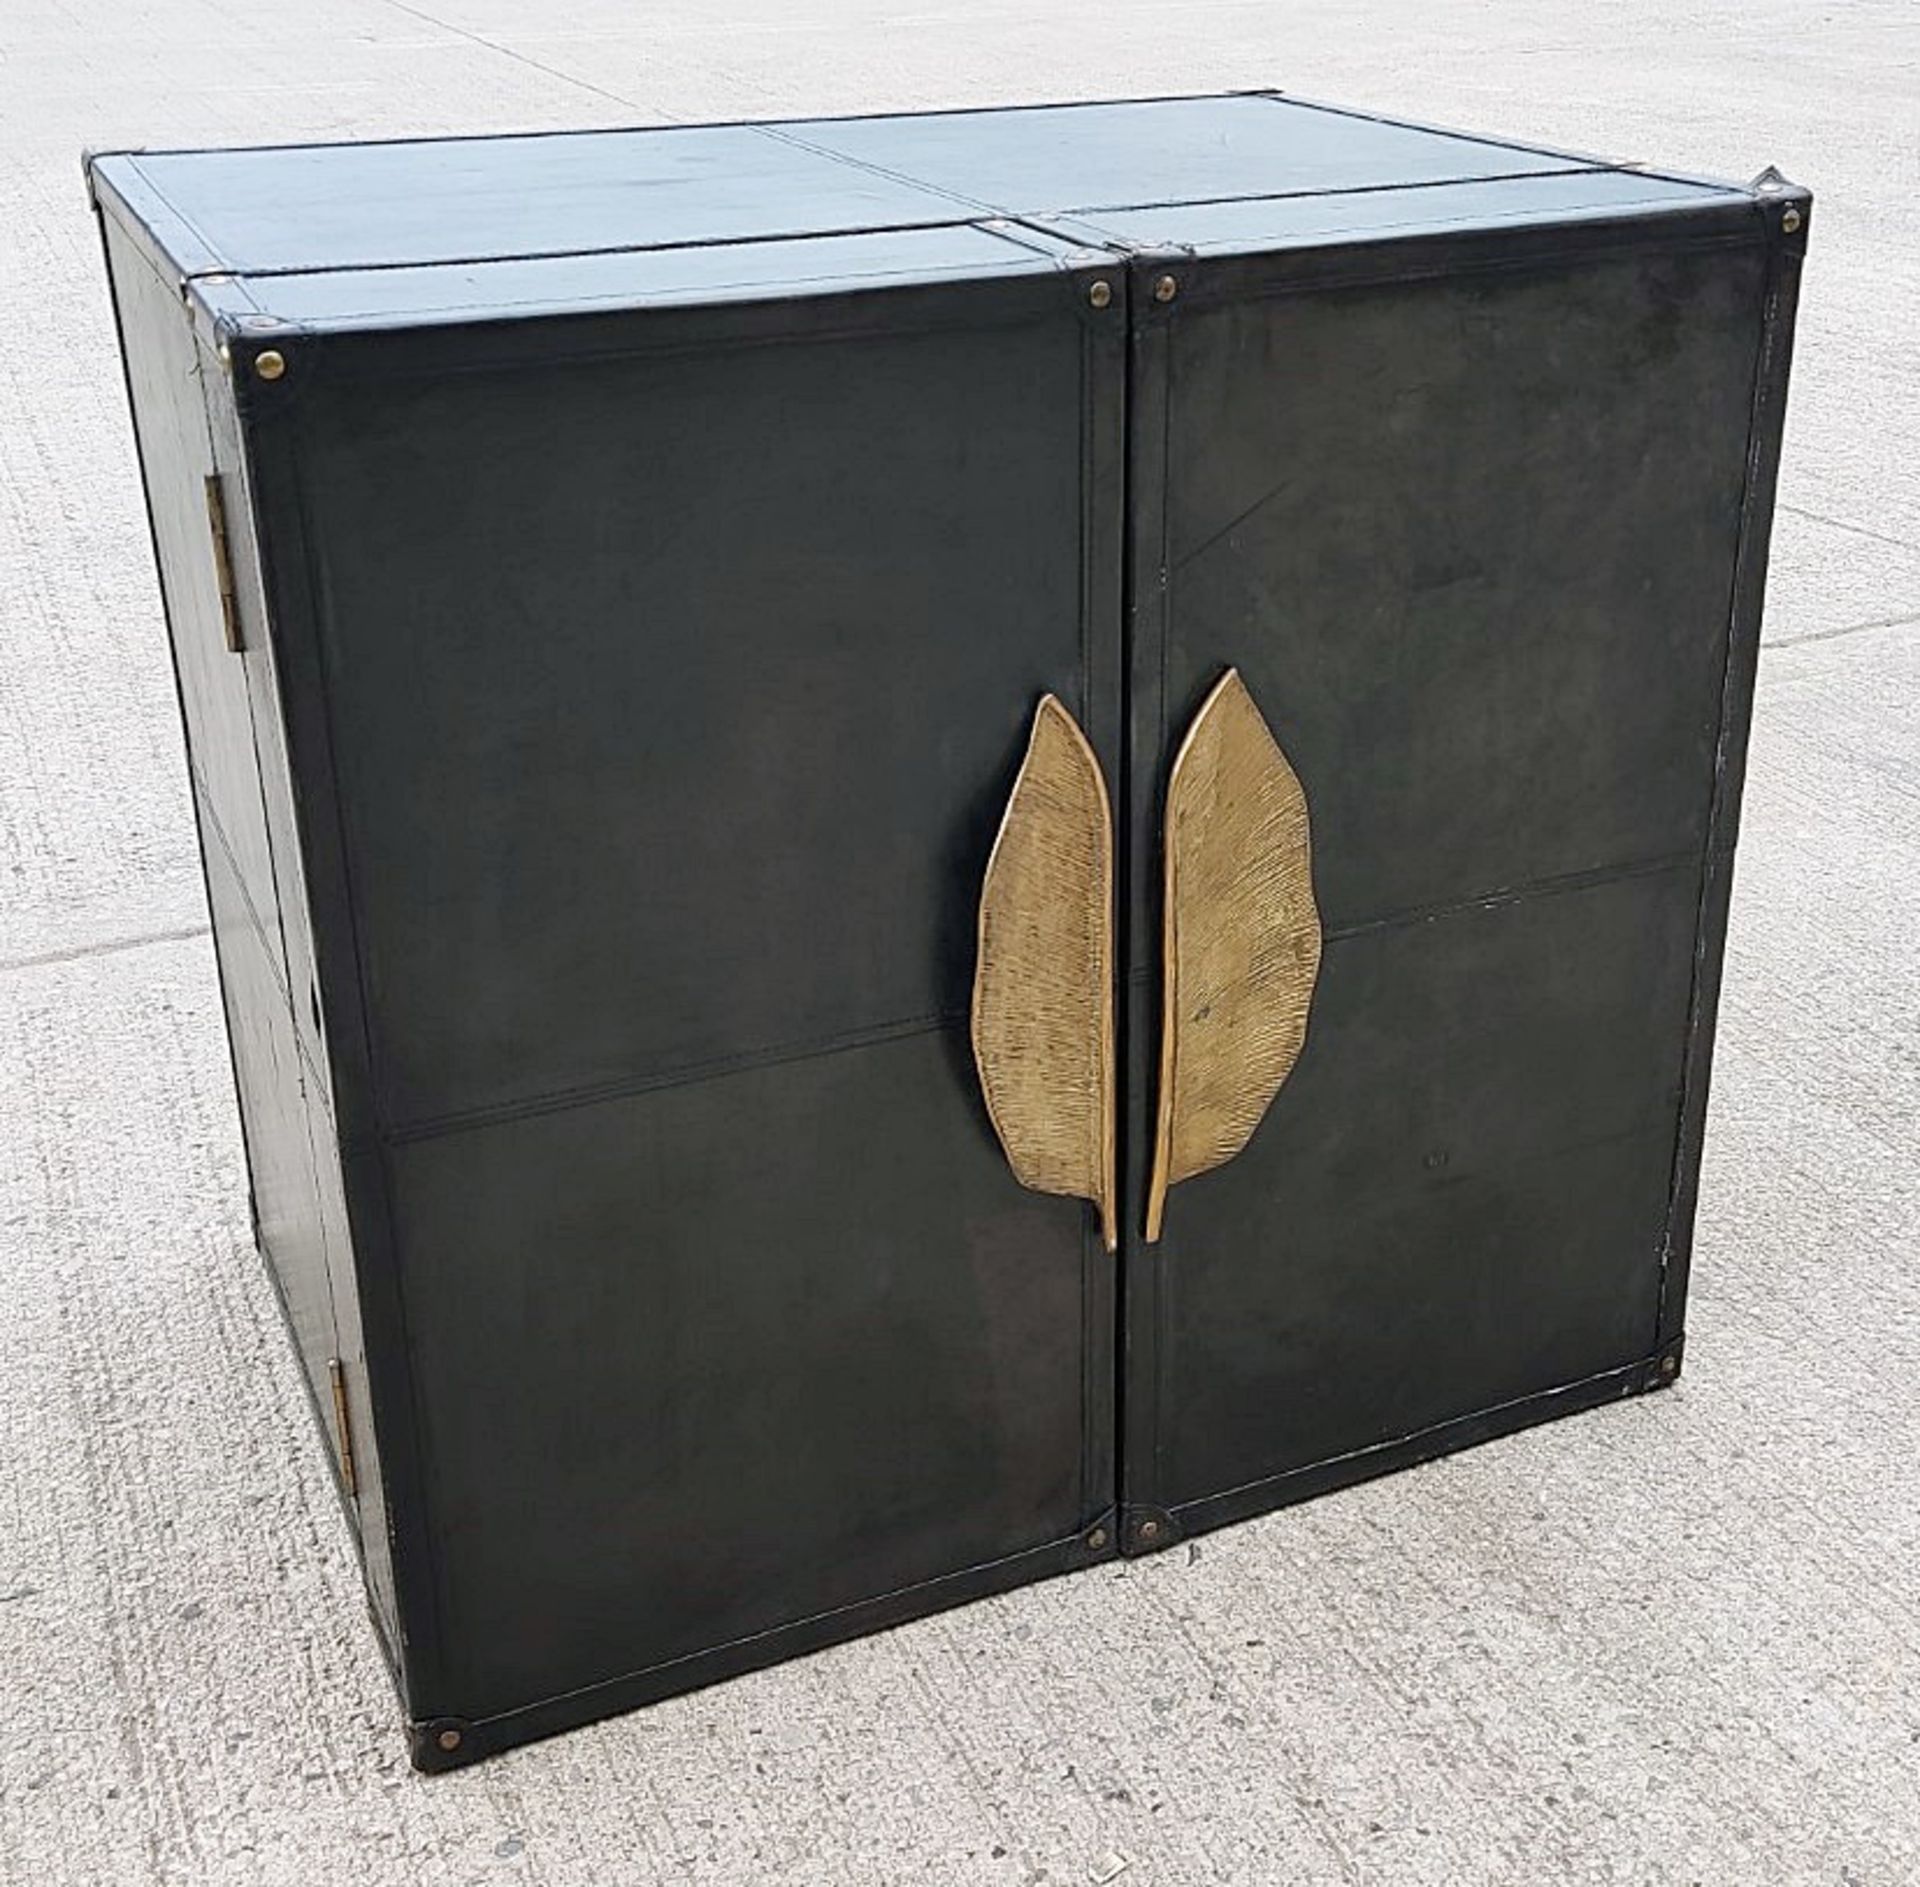 1 x Opulent Leather Upholstered 2-Door Cocktail Cabinet In A Dark Stain